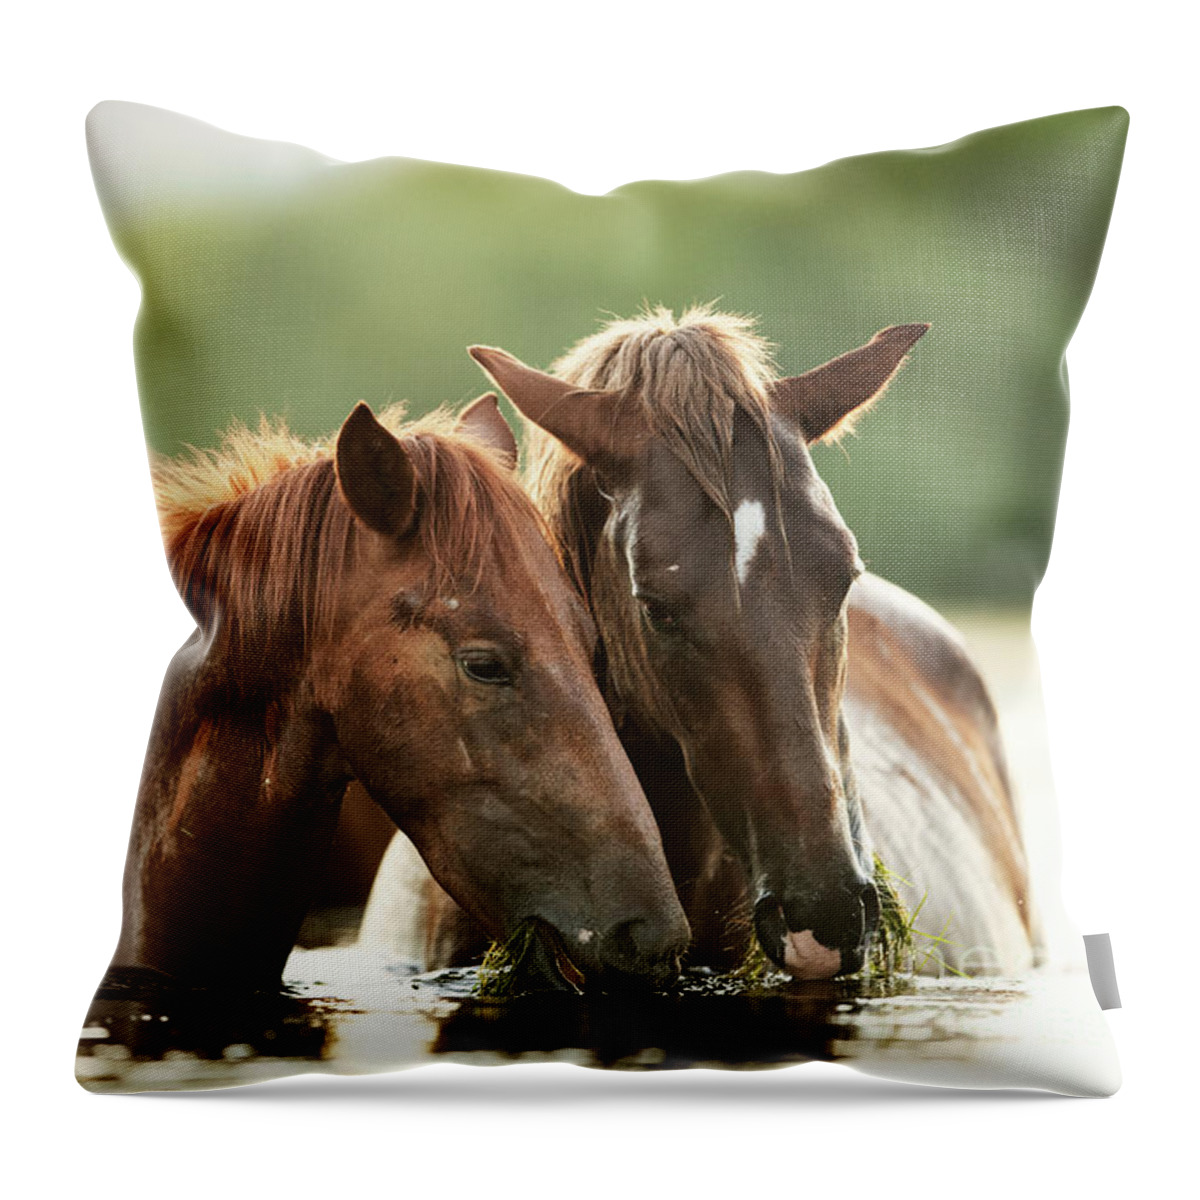 Salt River Wild Horses Throw Pillow featuring the photograph Sharing by Shannon Hastings